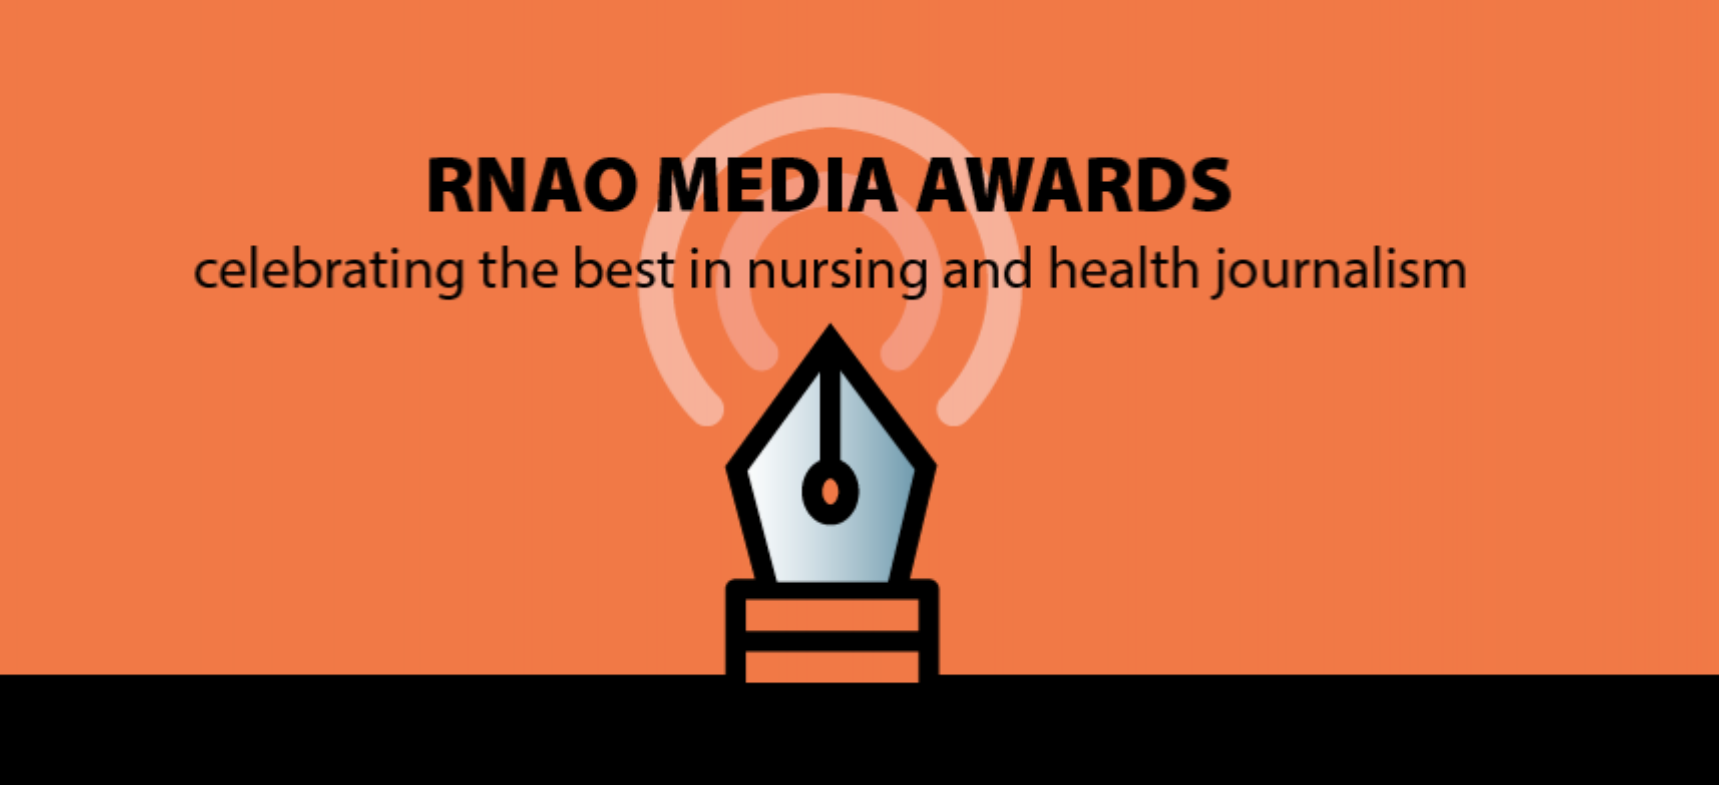 RNAO Media Awards: Celebrating the best in nursing and health journalism